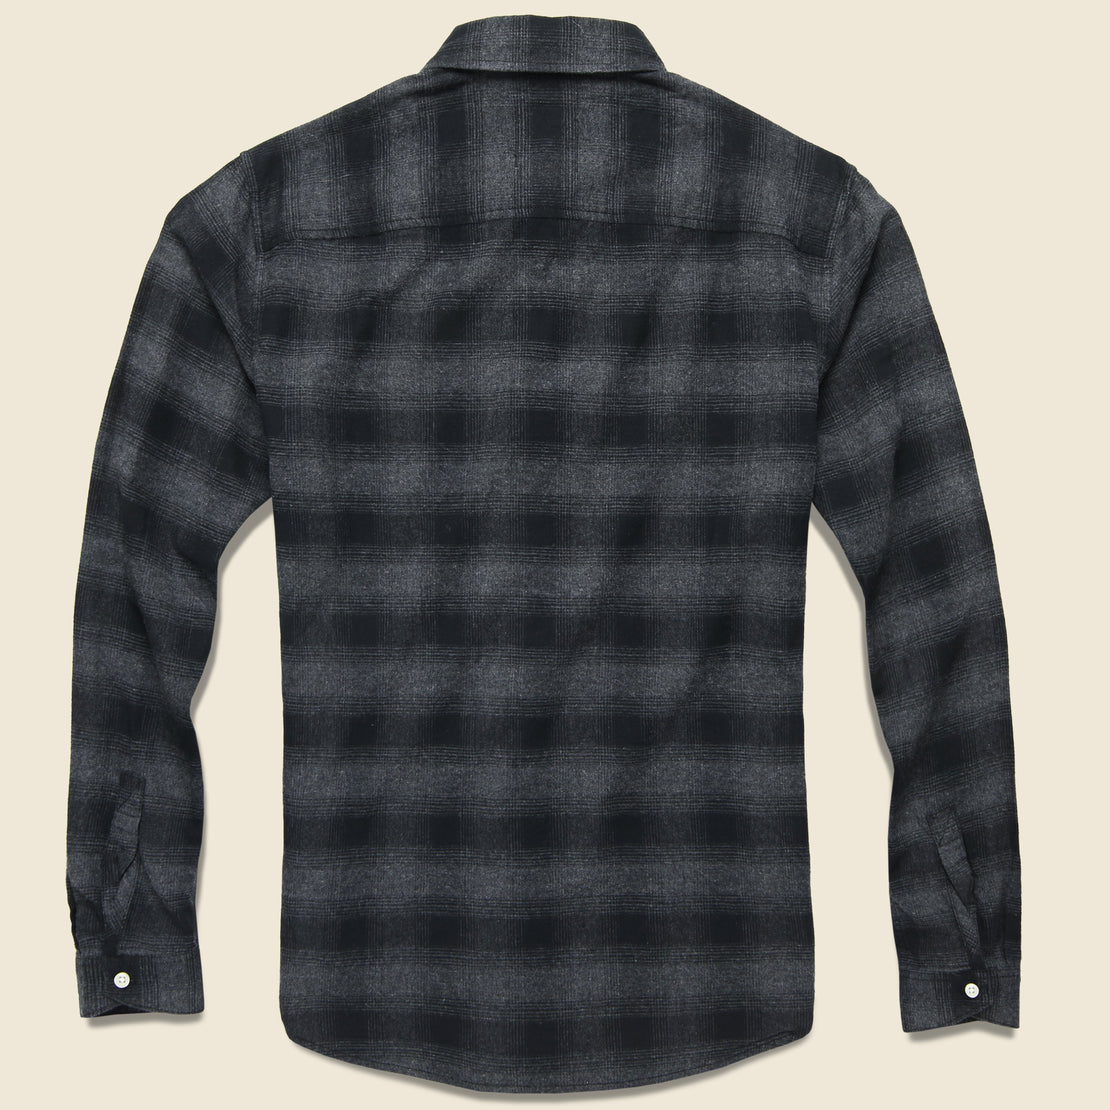 Lumberjack Flannel - Black - Life After Denim - STAG Provisions - Tops - L/S Woven - Plaid